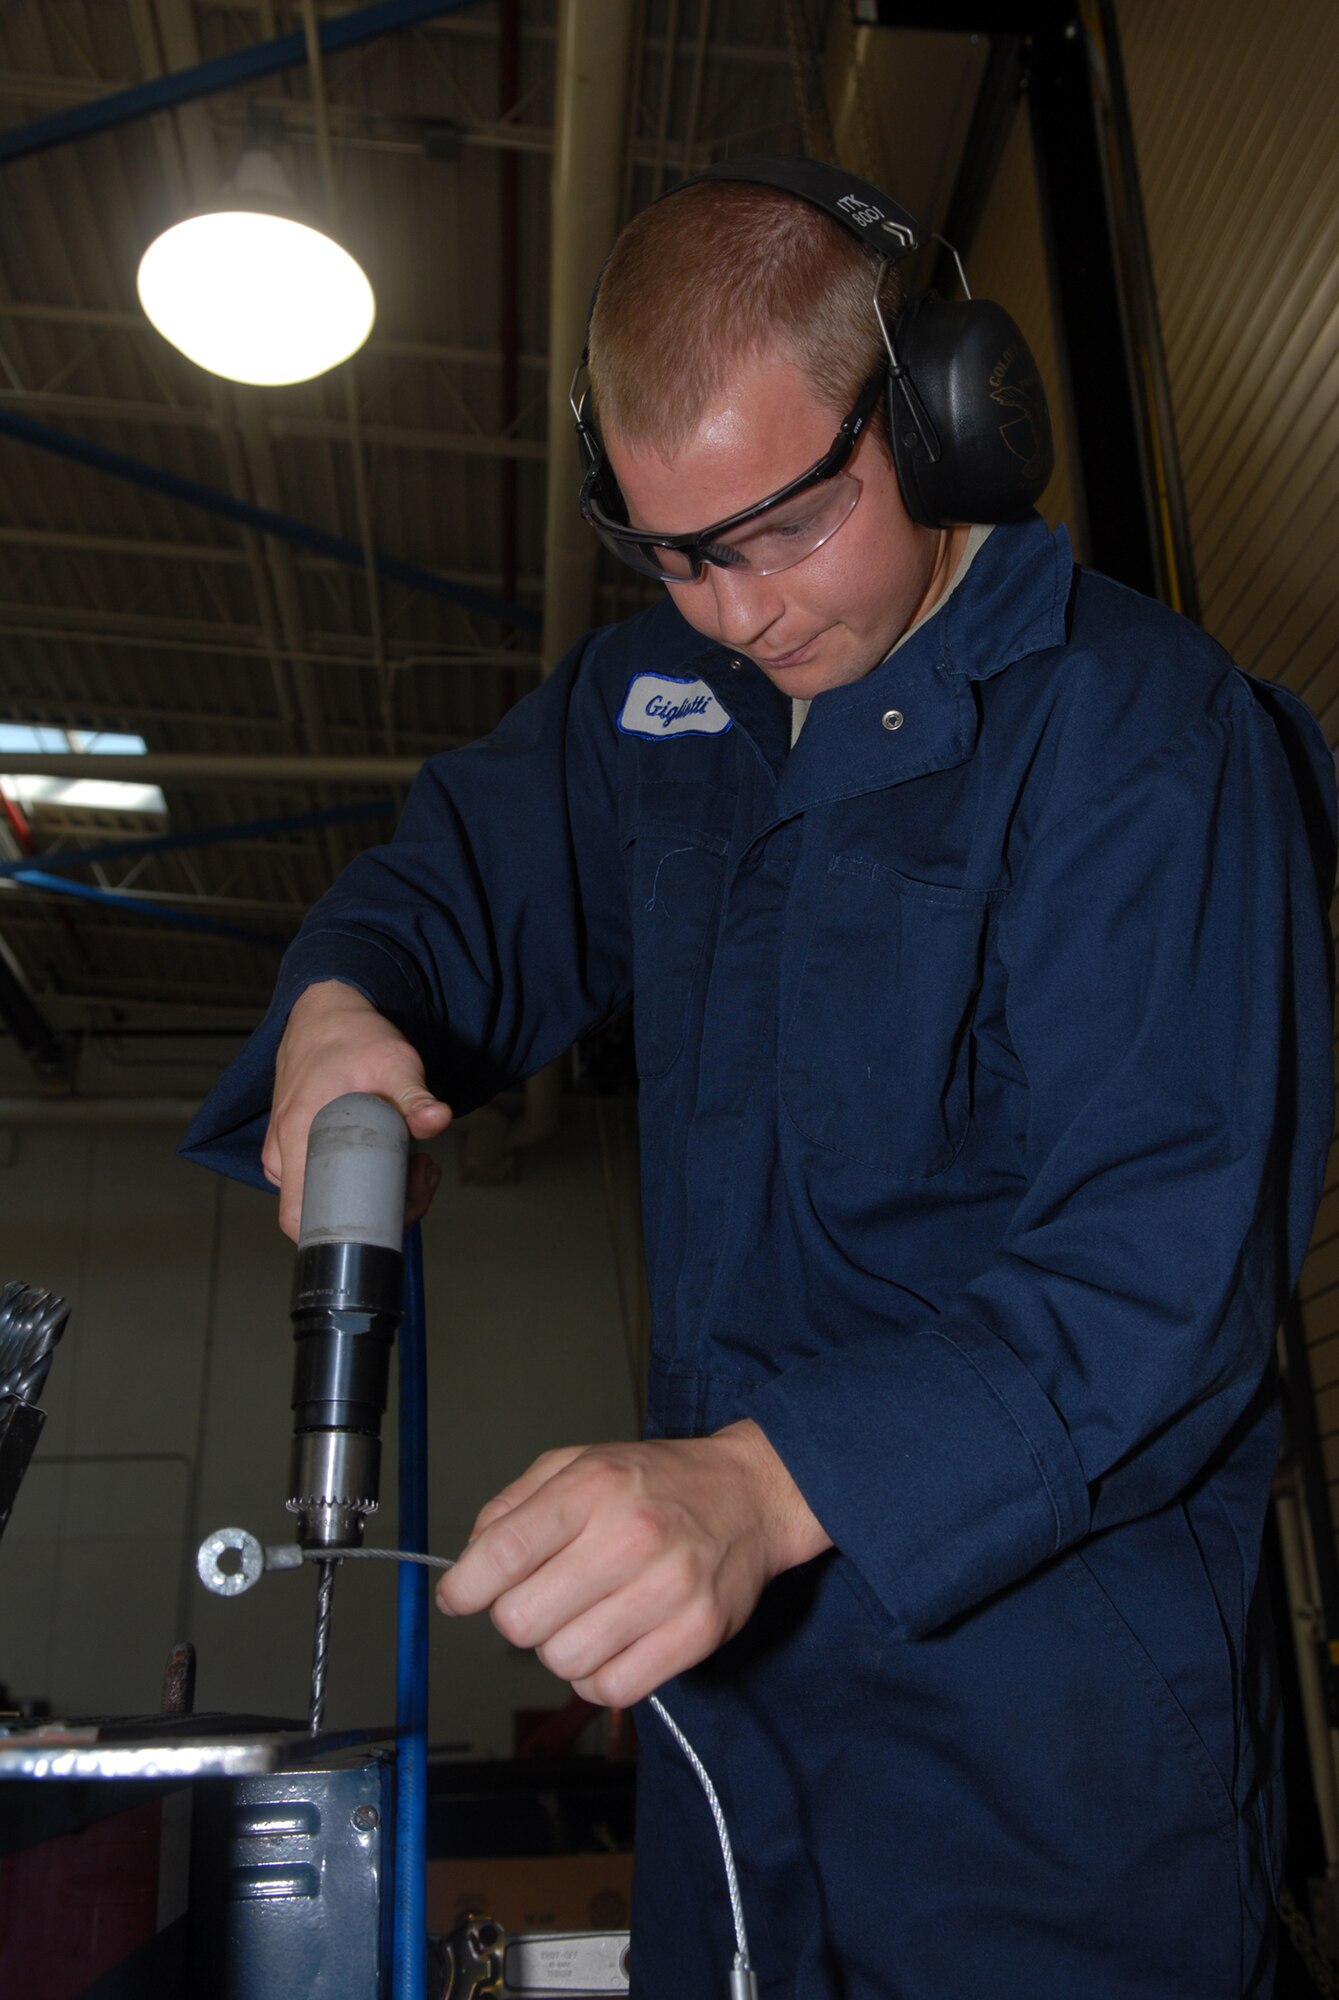 VANDNEBERG AIR FORCE BASE, Calif. --  Airman 1st Class Micheal Gigliotti, 30th Logistic Readiness Squadron, drills a hole to mount a support bracket for an airline handle on Oct. 29. (U.S. Air Force photo / Senior Airman Nicole Roberts)